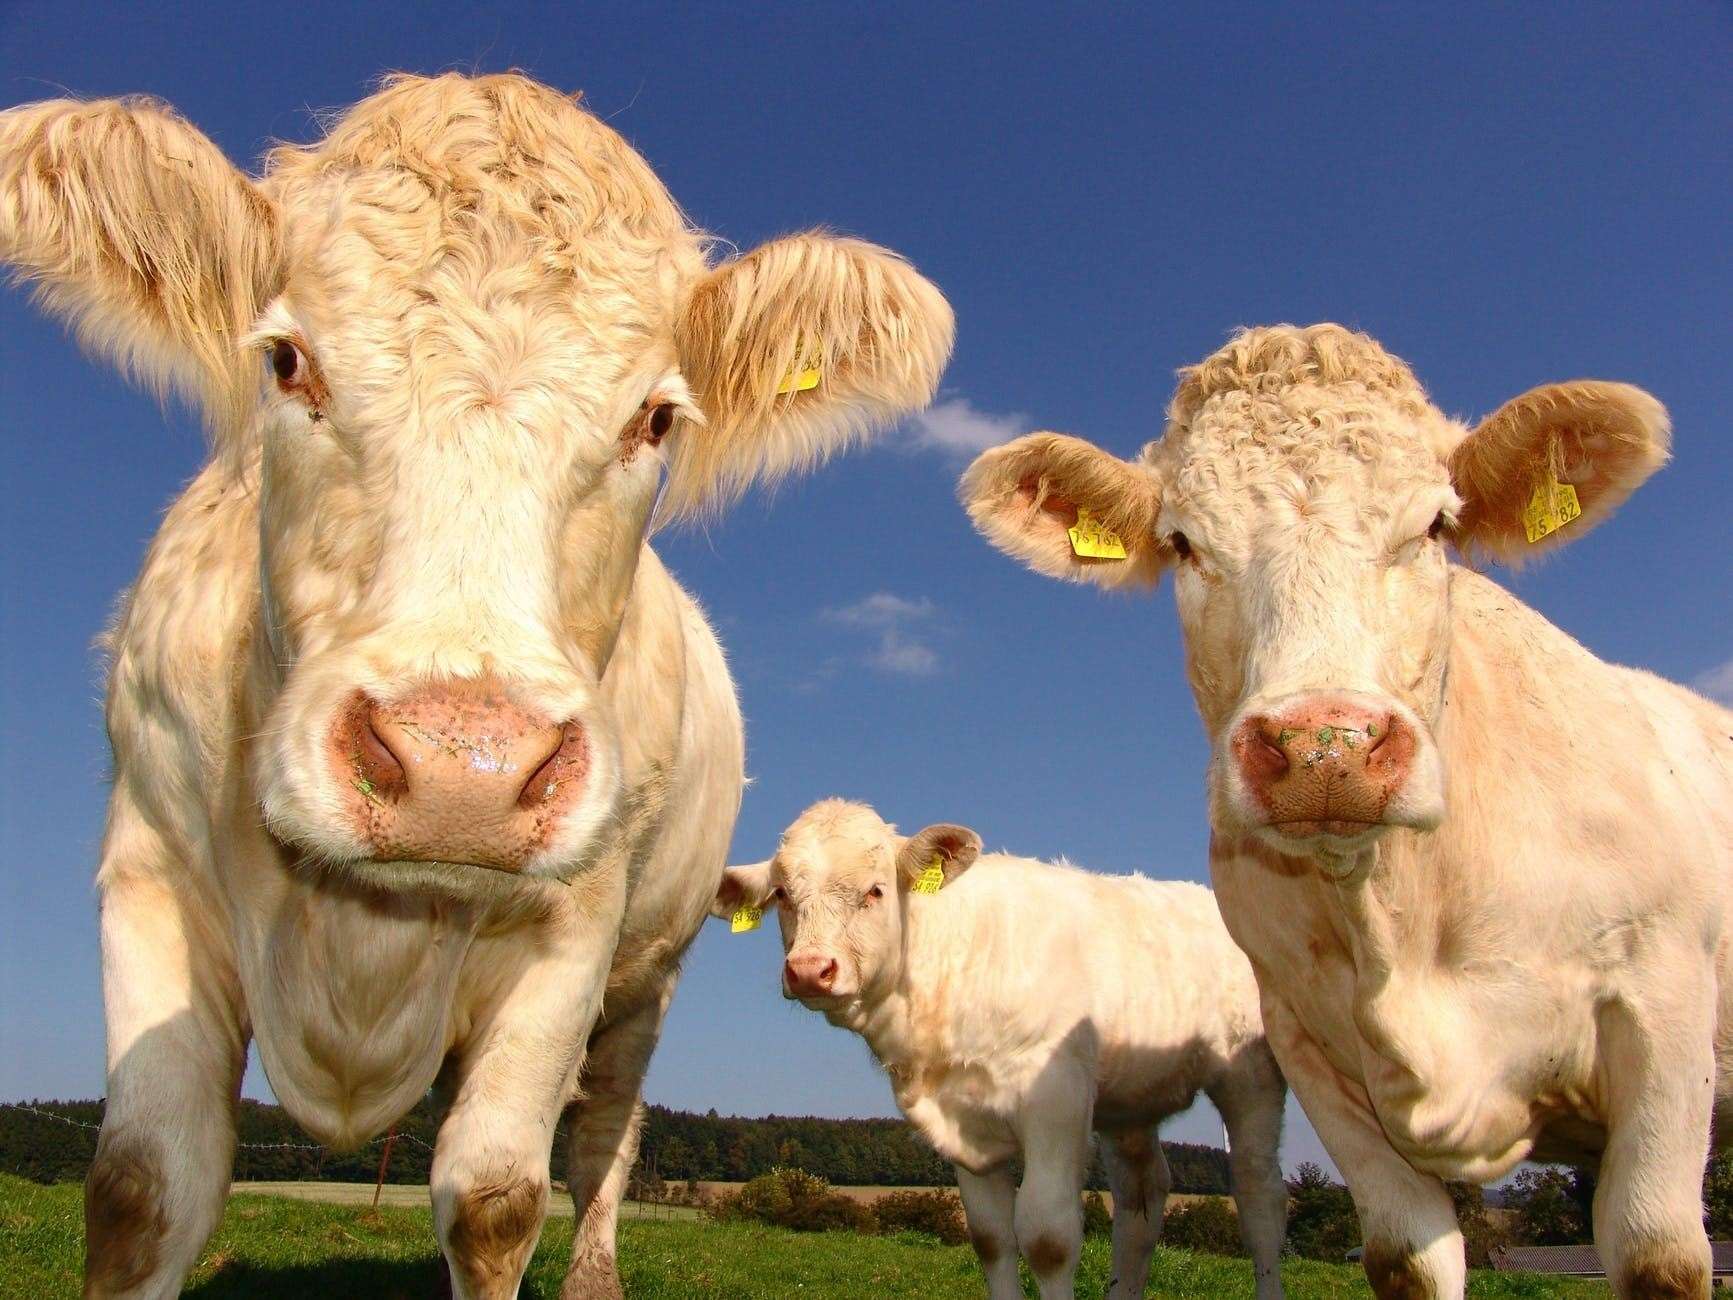 Millions of cows were slaughtered in order to try and eradicate BSE in the UK's cattle herds